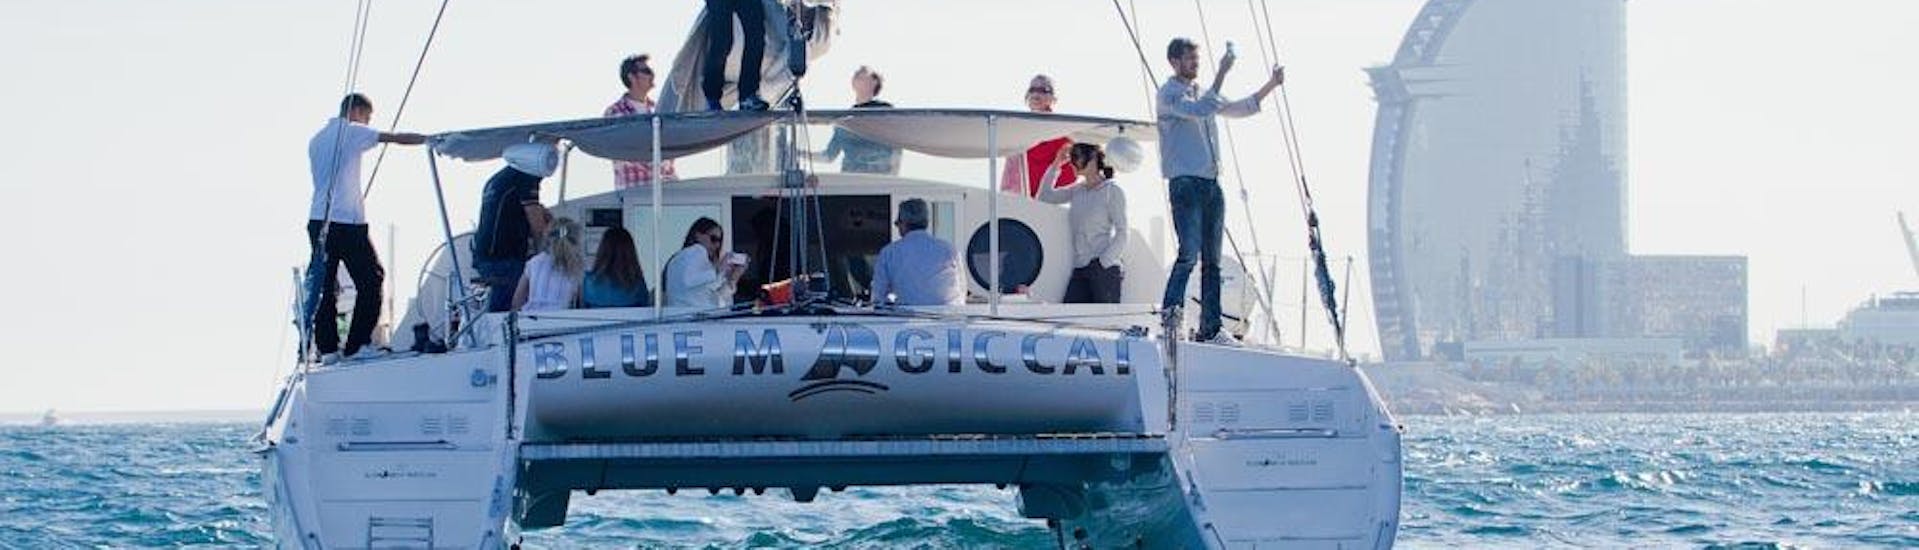 People having fun during a boat trip from Barcelona on the Charters Bcn catamaran - Blue Magic Cat.